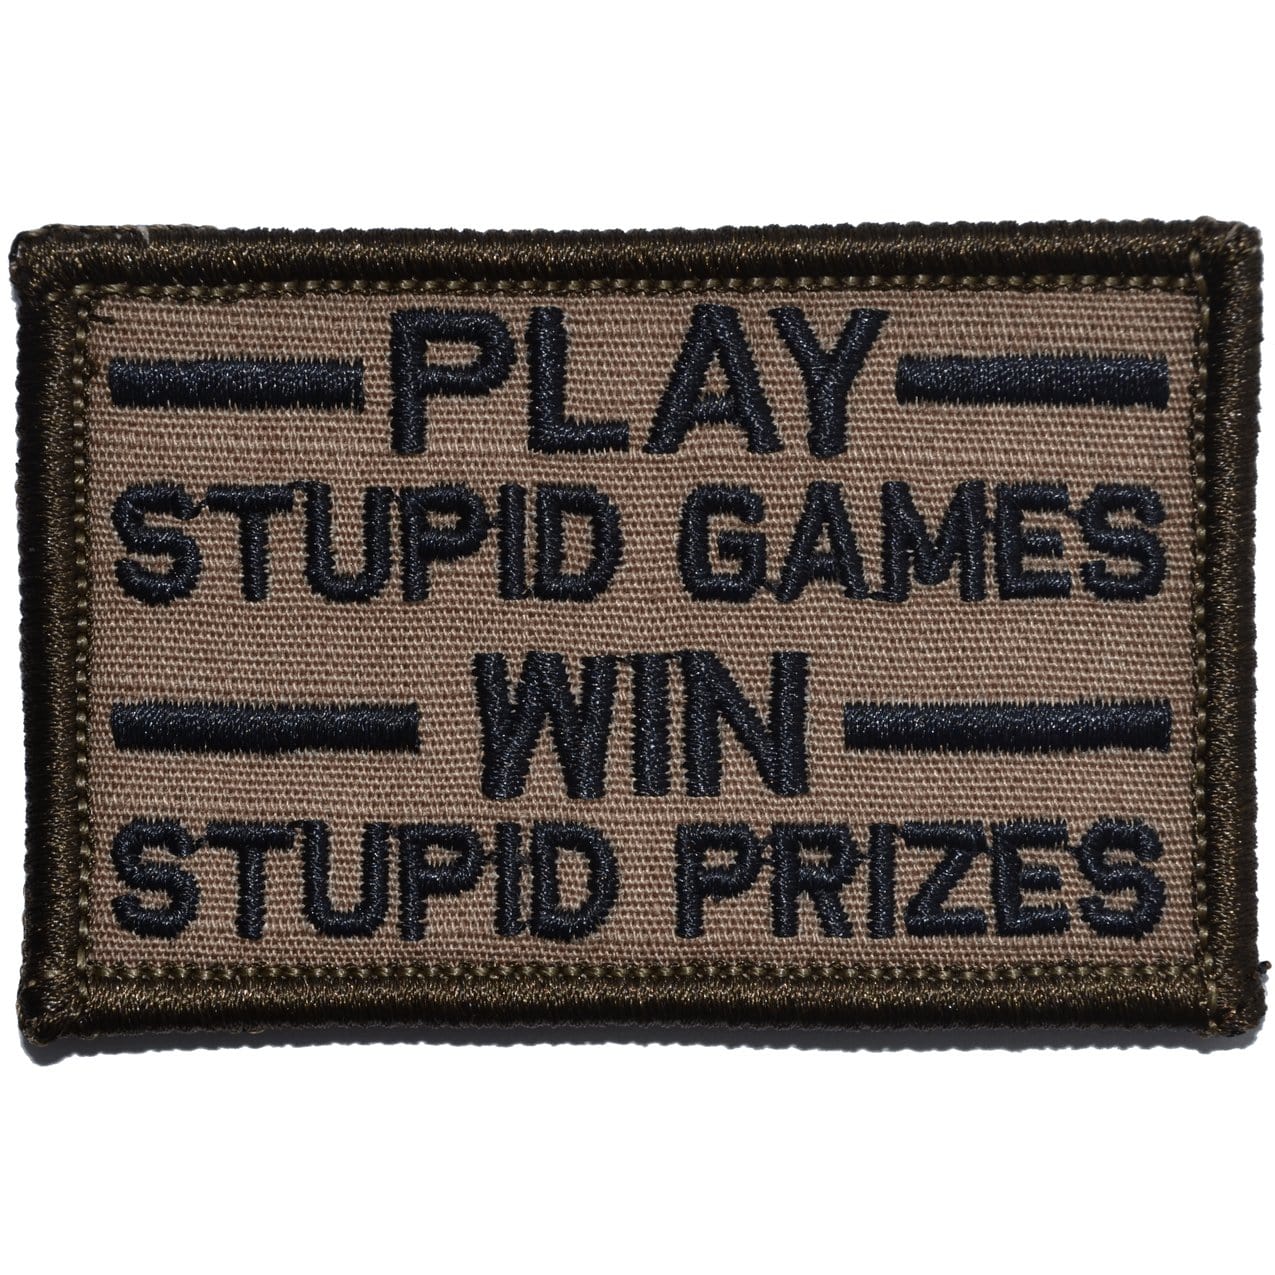 Tactical Gear Junkie Patches Coyote Brown w/ Black Play Stupid Games, Win Stupid Prizes - 2x3 Patch